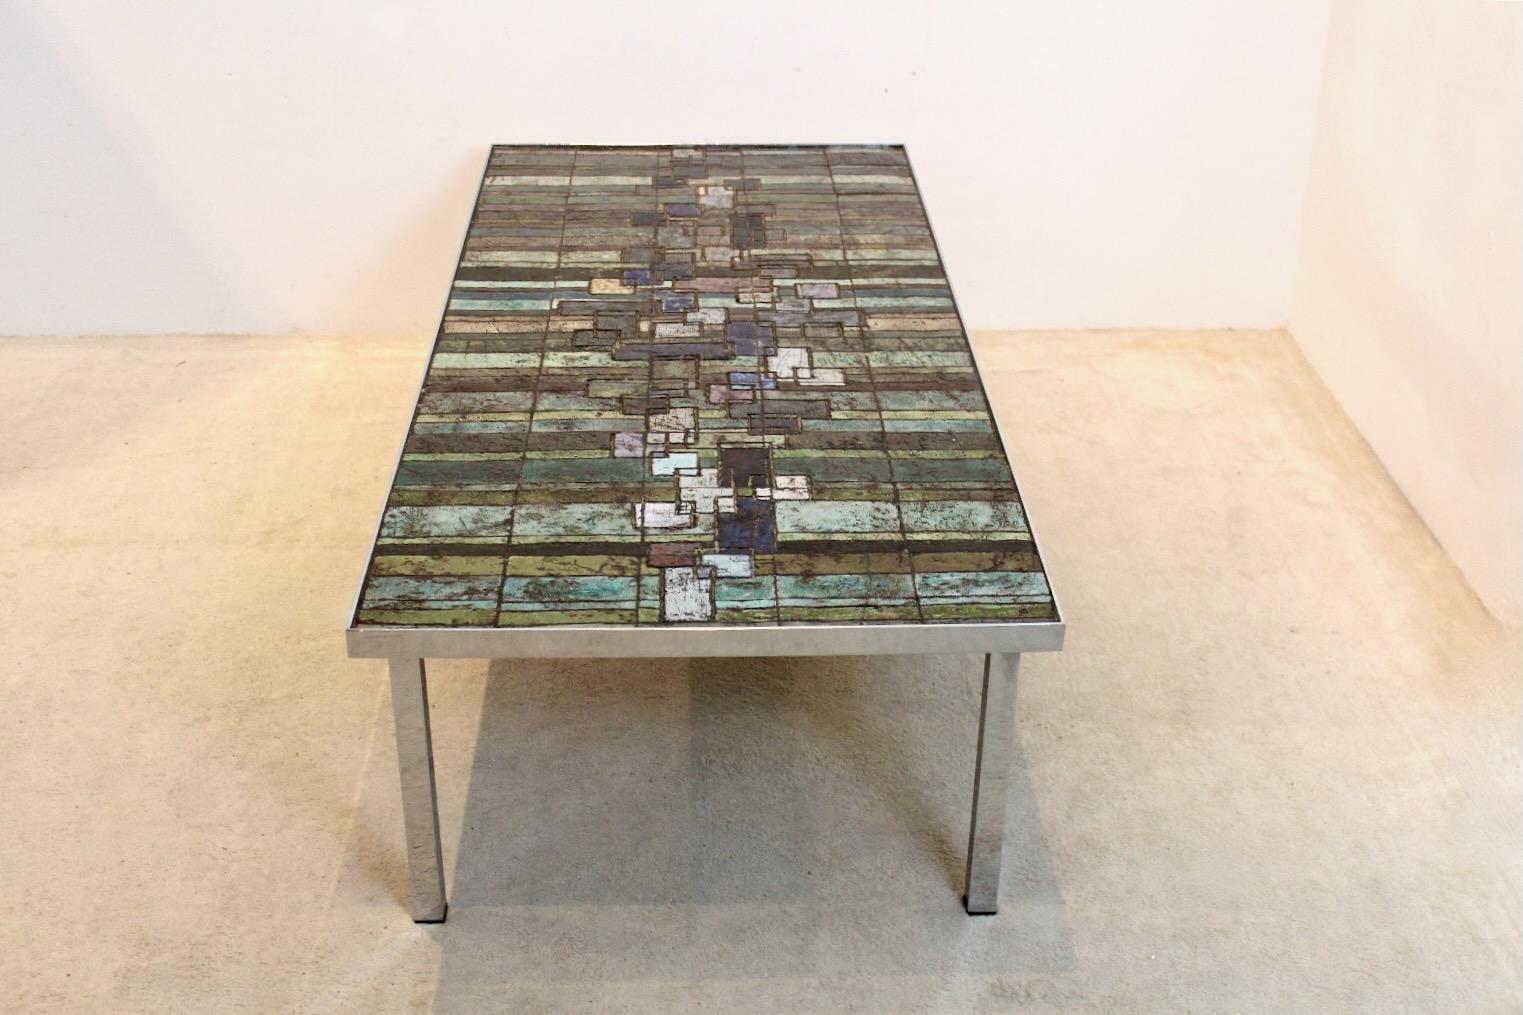 Fantastic brutalist coffee table designed by Pia Manu for Amphora in Belgium, 1970s. The table consists of a Chromed steel base with a Handmade Slate and Ceramic tiled top. The tabletop has a perfect composition composed of inlays of a beautiful